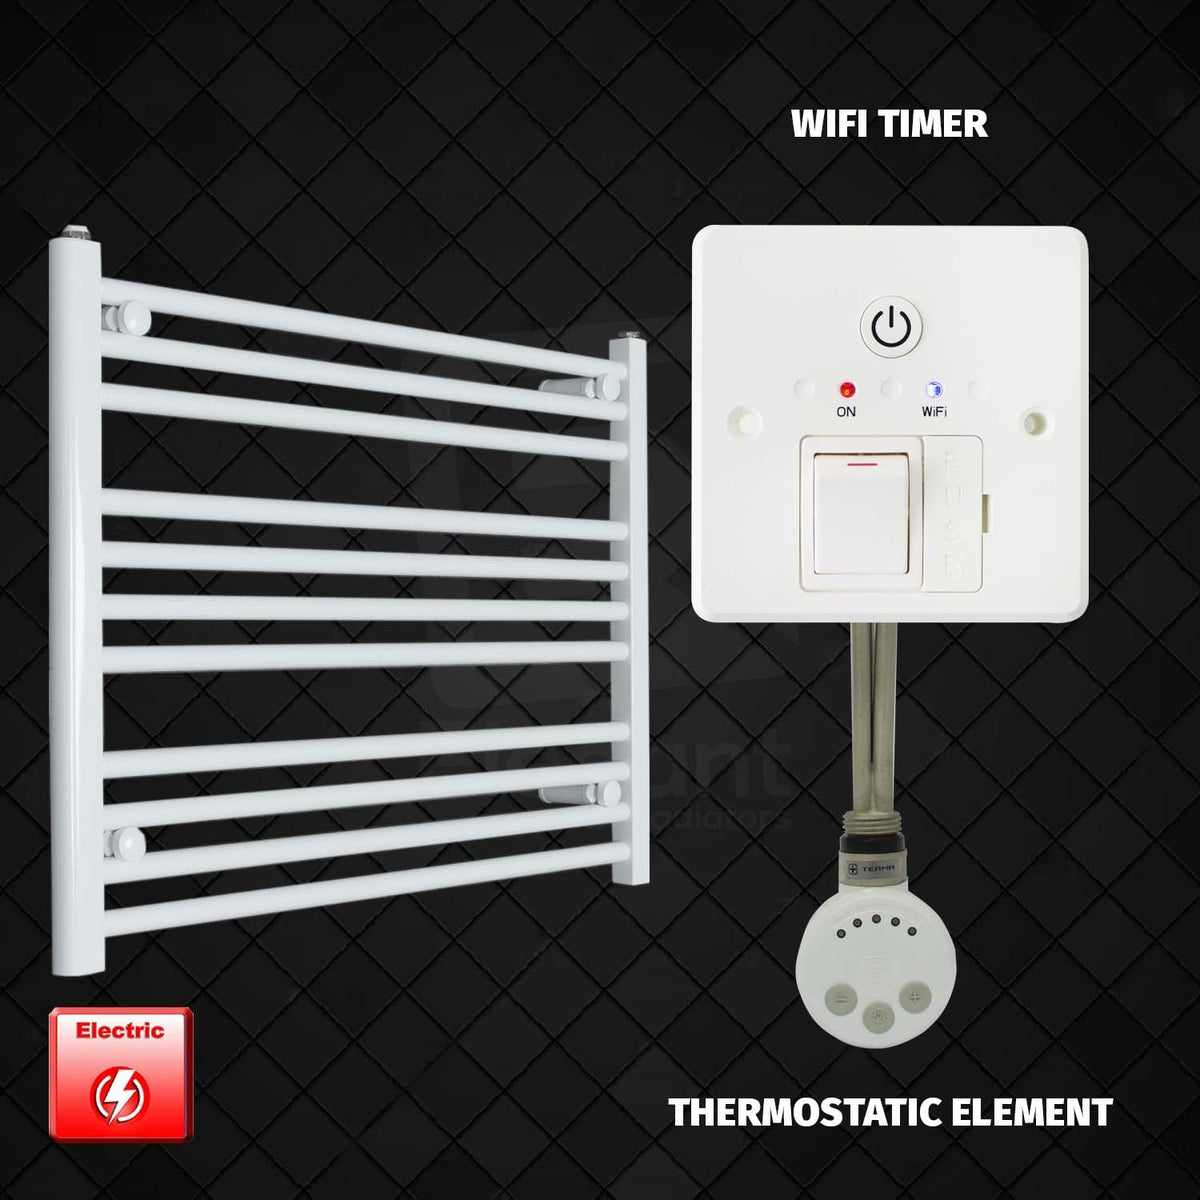 600 x 900 Pre-Filled Electric Heated Towel Radiator White HTR MOA Thermostatic element Wifi timer